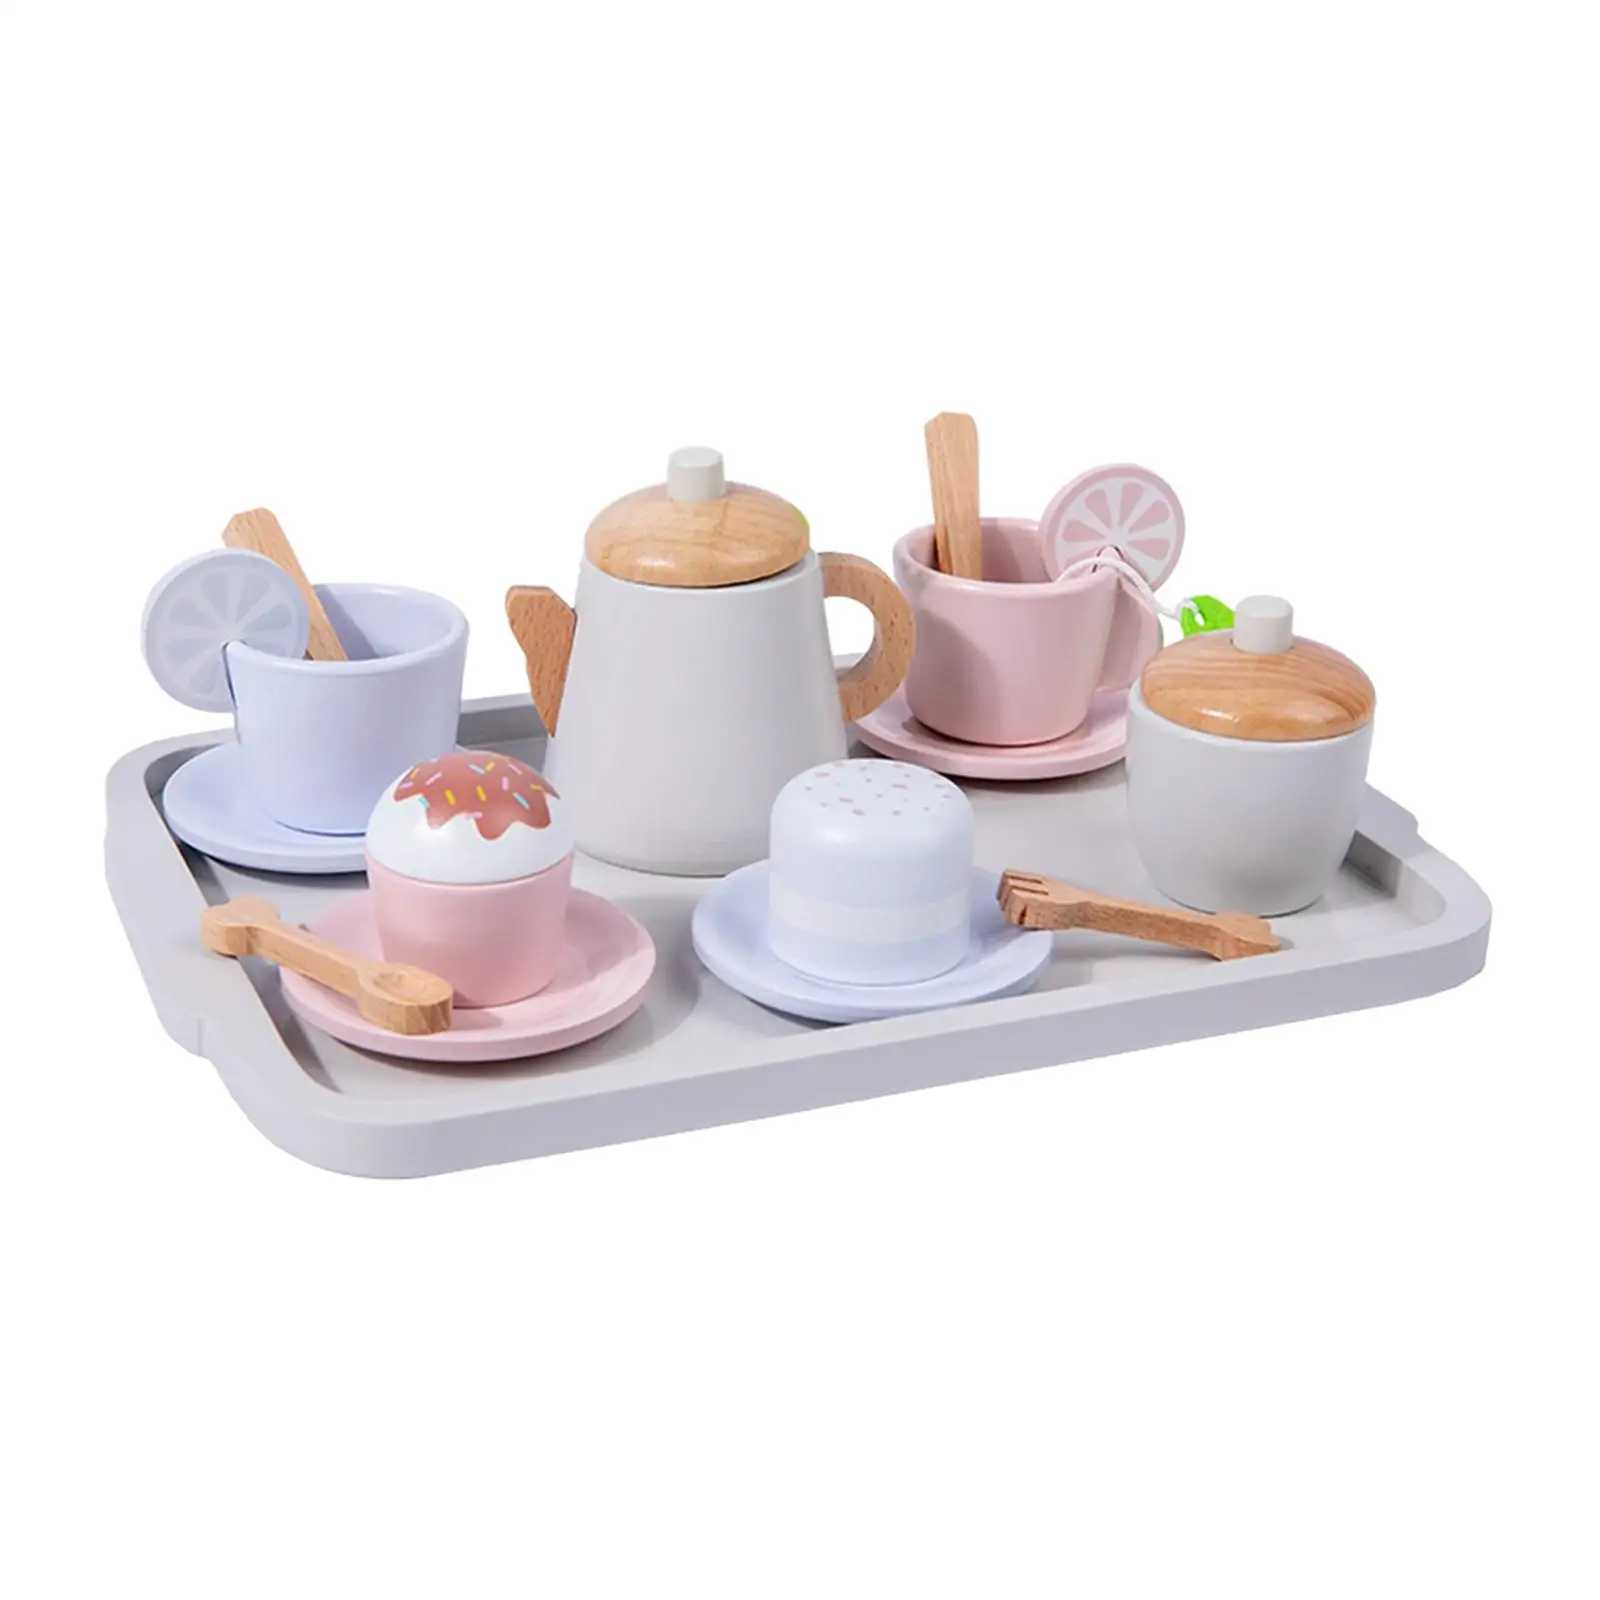 Toddlers Tea Set, Pretend Play Playset Role Play Wooden Tea Set, Princess Tea Time Toys Playset for Kids Children Toddlers